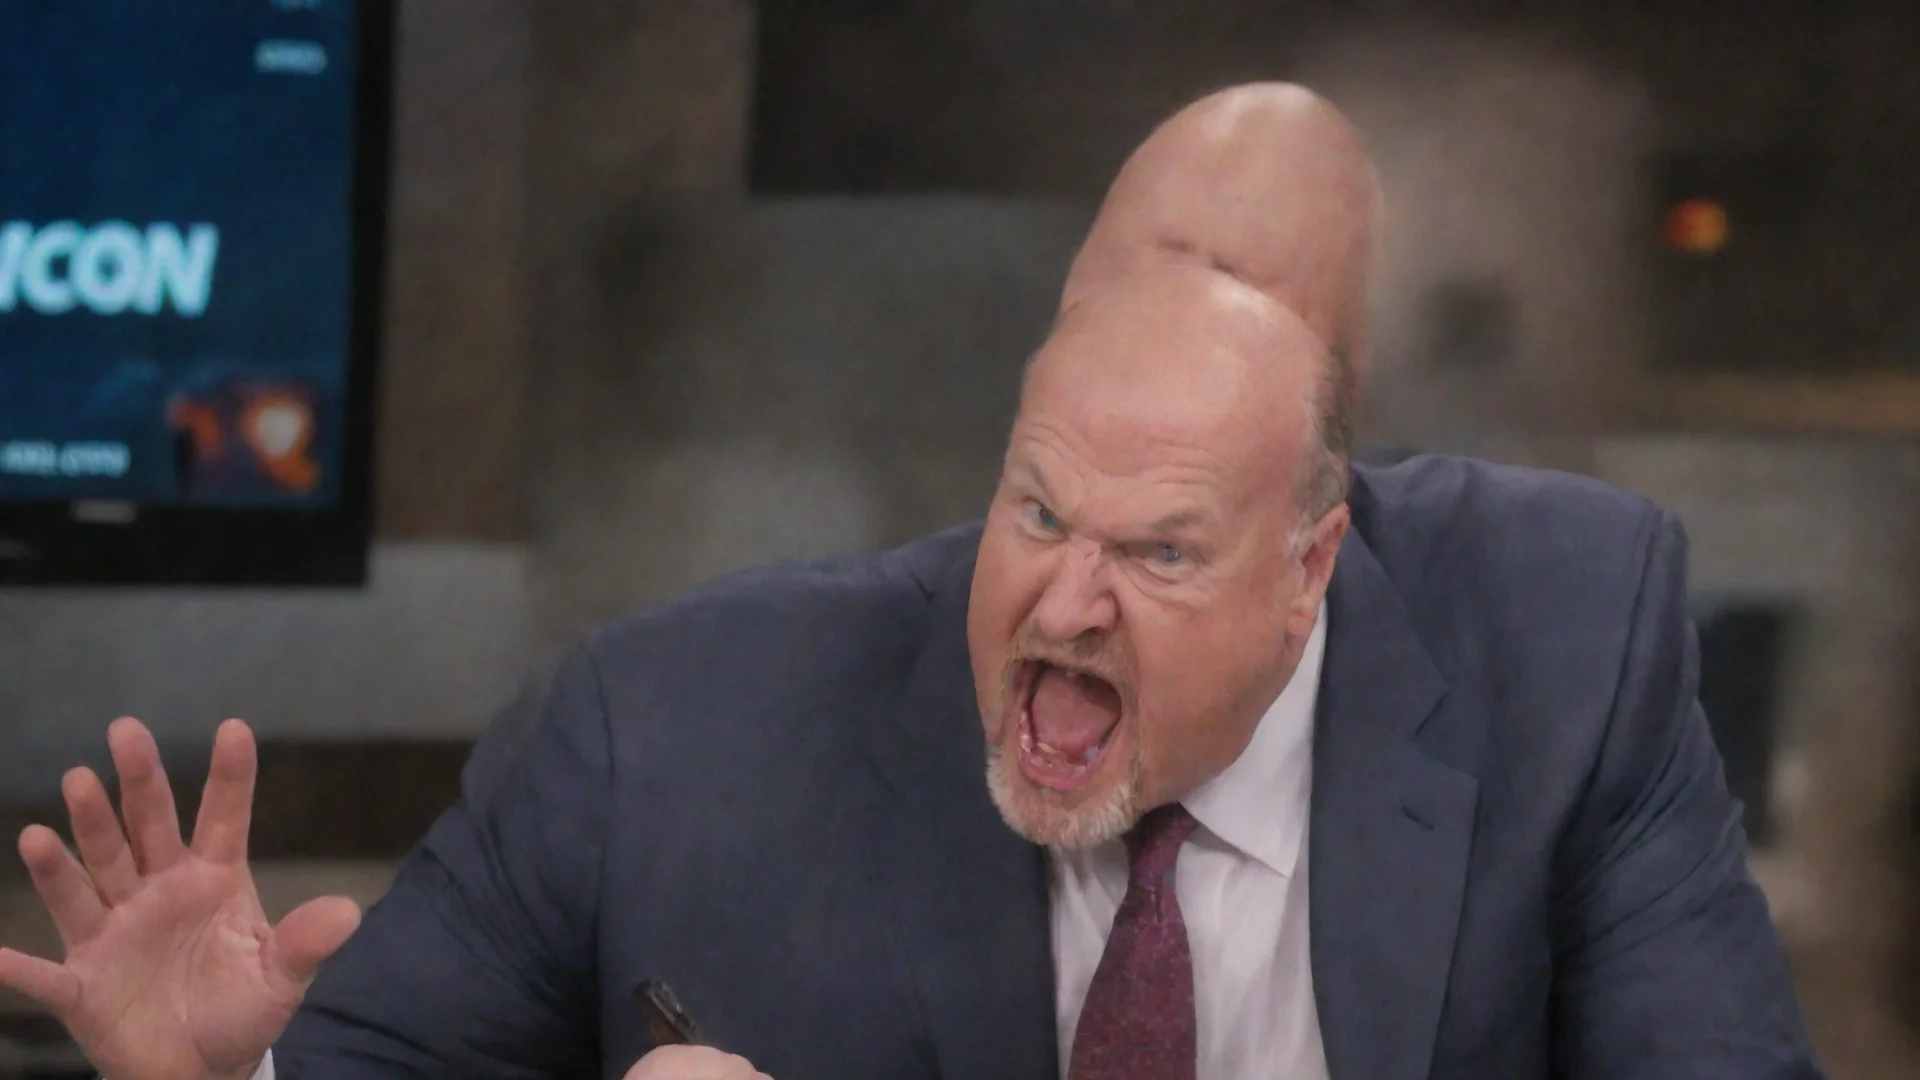 amazing jim cramer screaming at bitcoin awesome portrait 2 wide